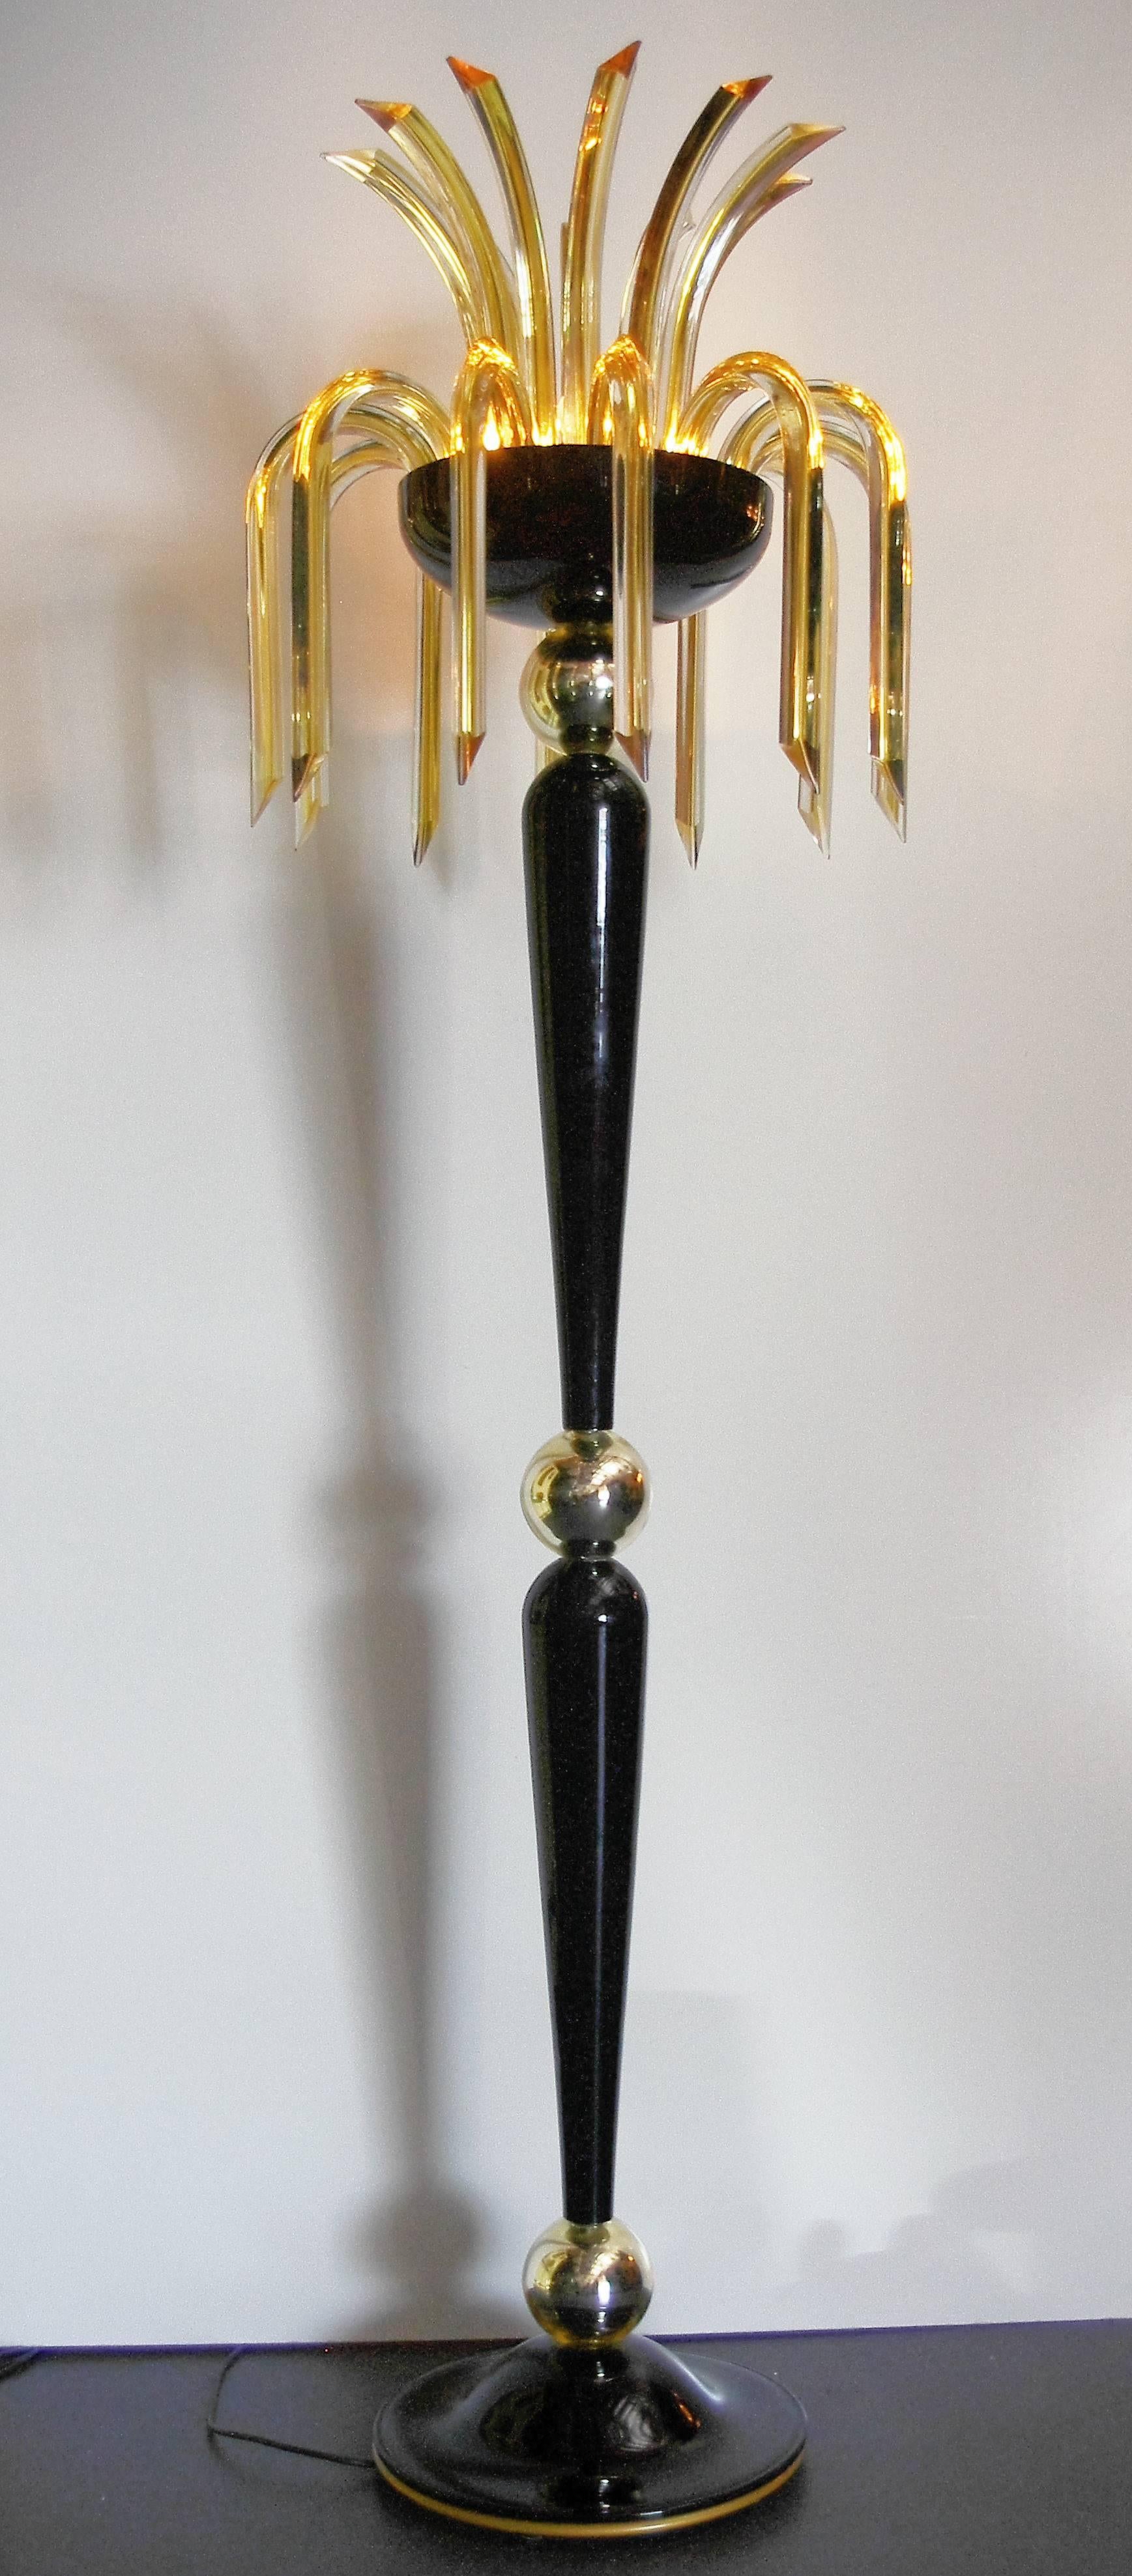 One of a kind pair of Italian modern floor lamps with blown black Murano glass stems and blown mercury glass globes with scrolling gold infused Murano Triedri glasses, designed by Fabio Bergomi for Fabio Ltd / Made in Italy
1 light E26 or E27 type